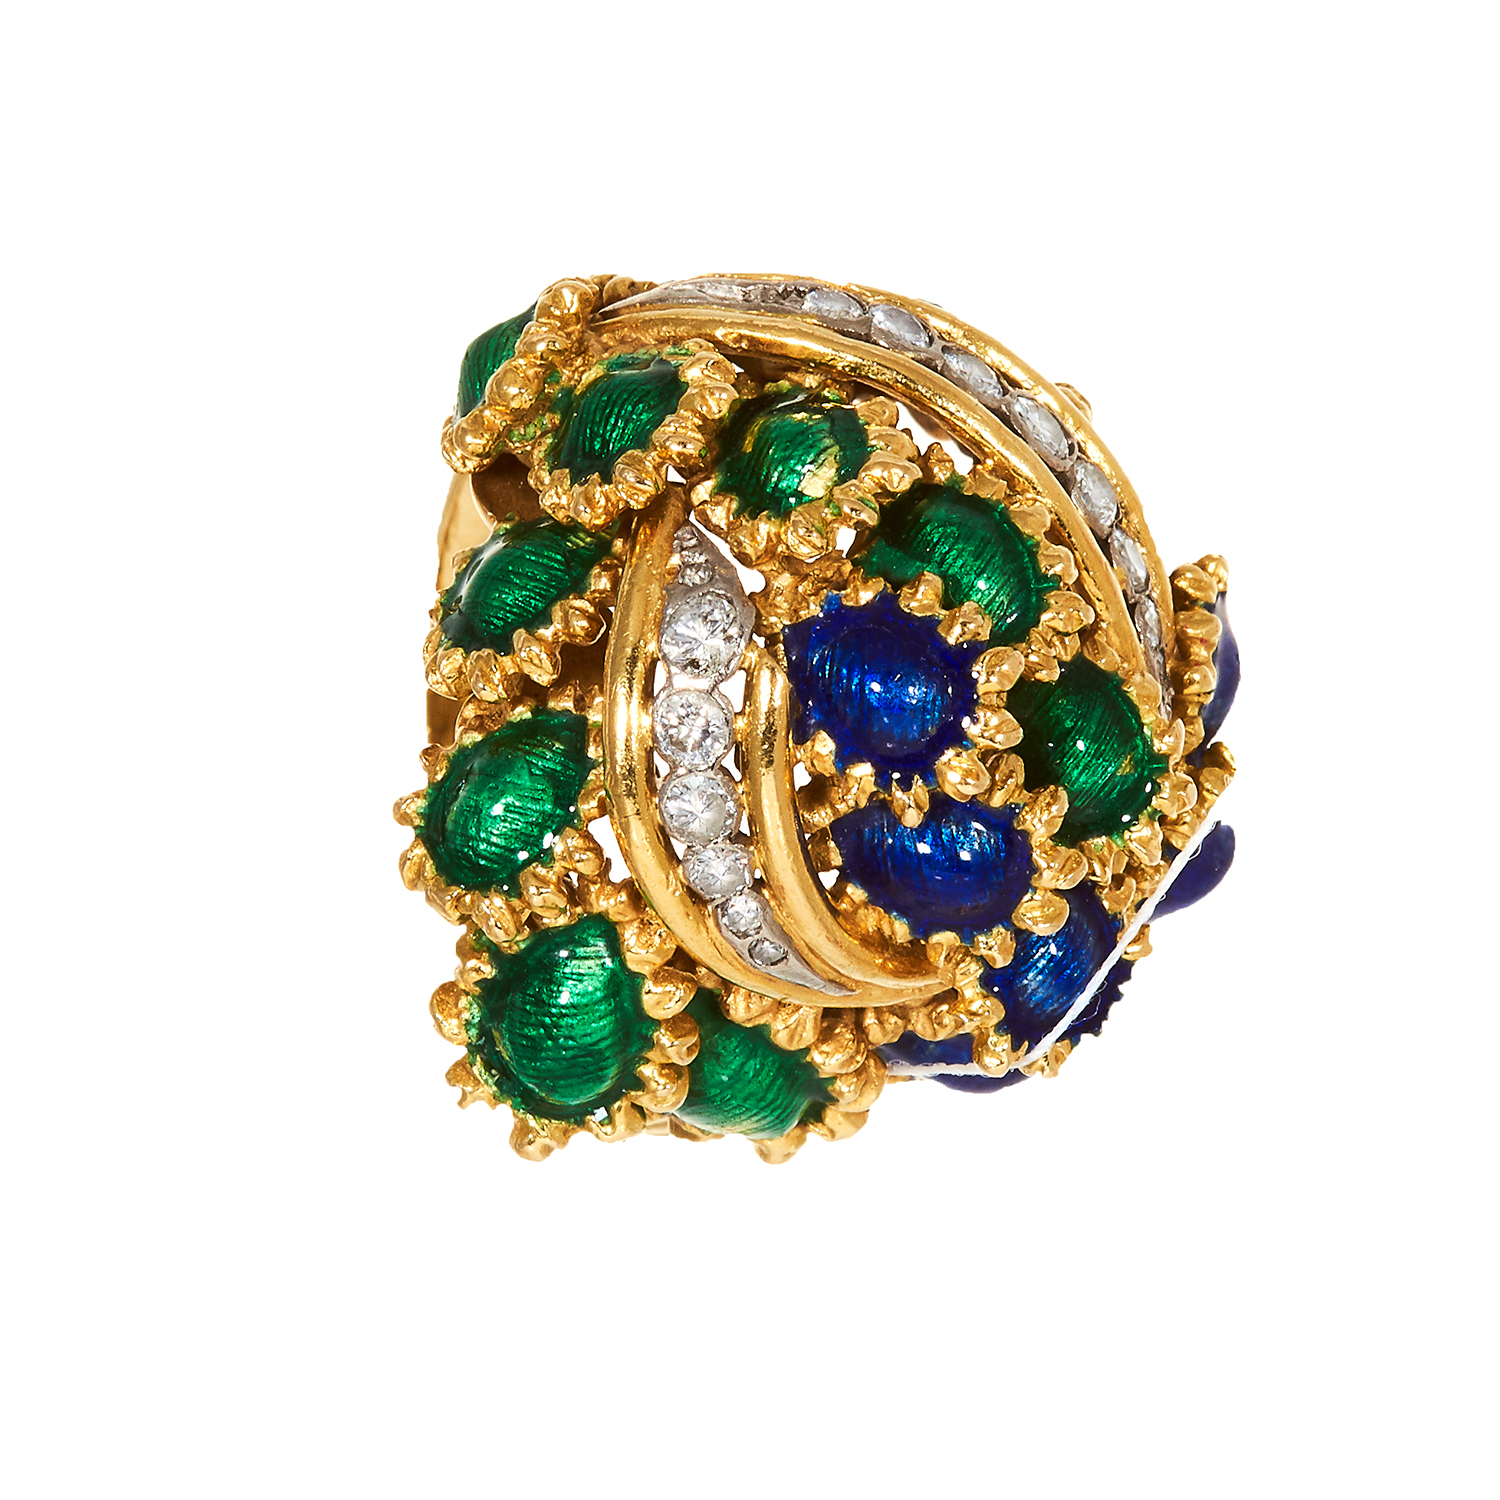 A DIAMOND AND ENAMEL BOMBE RING, KUTCHINSKY, CIRCA 1969 in 18ct yellow gold, jewelled with curved